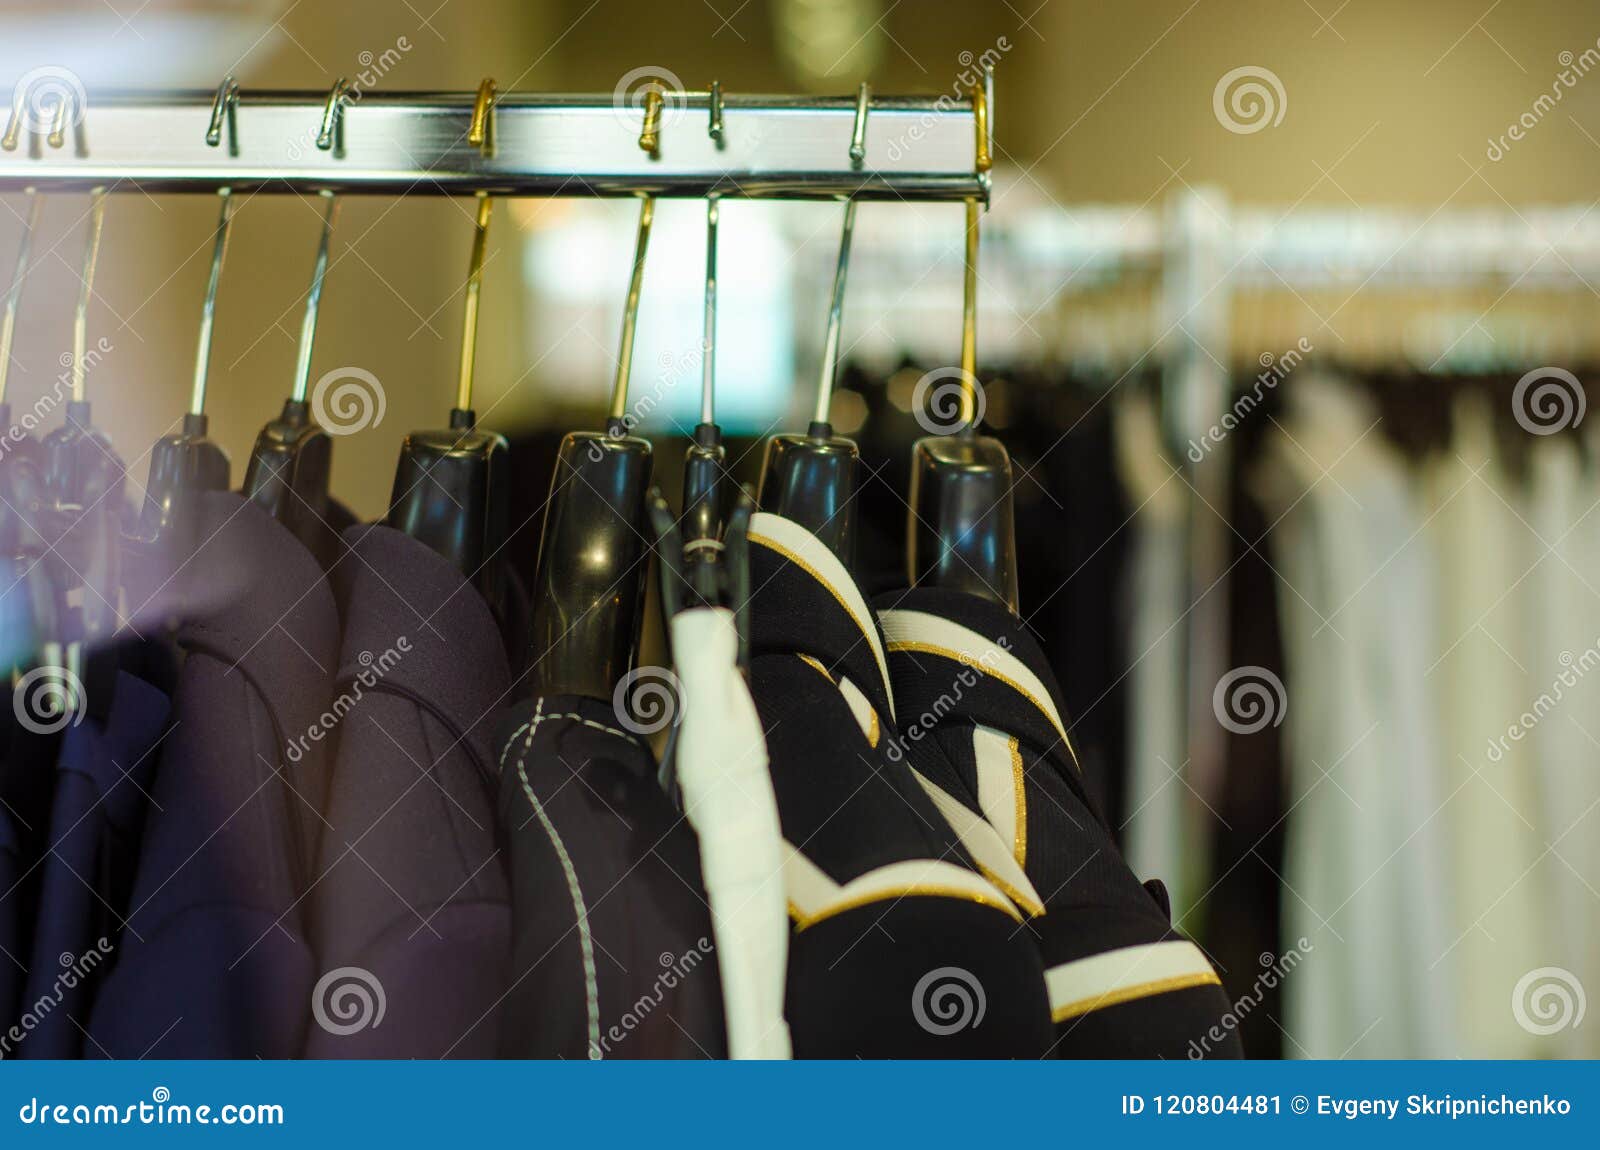 Rack with Hangers Woman Female Clothes Stock Image - Image of market ...